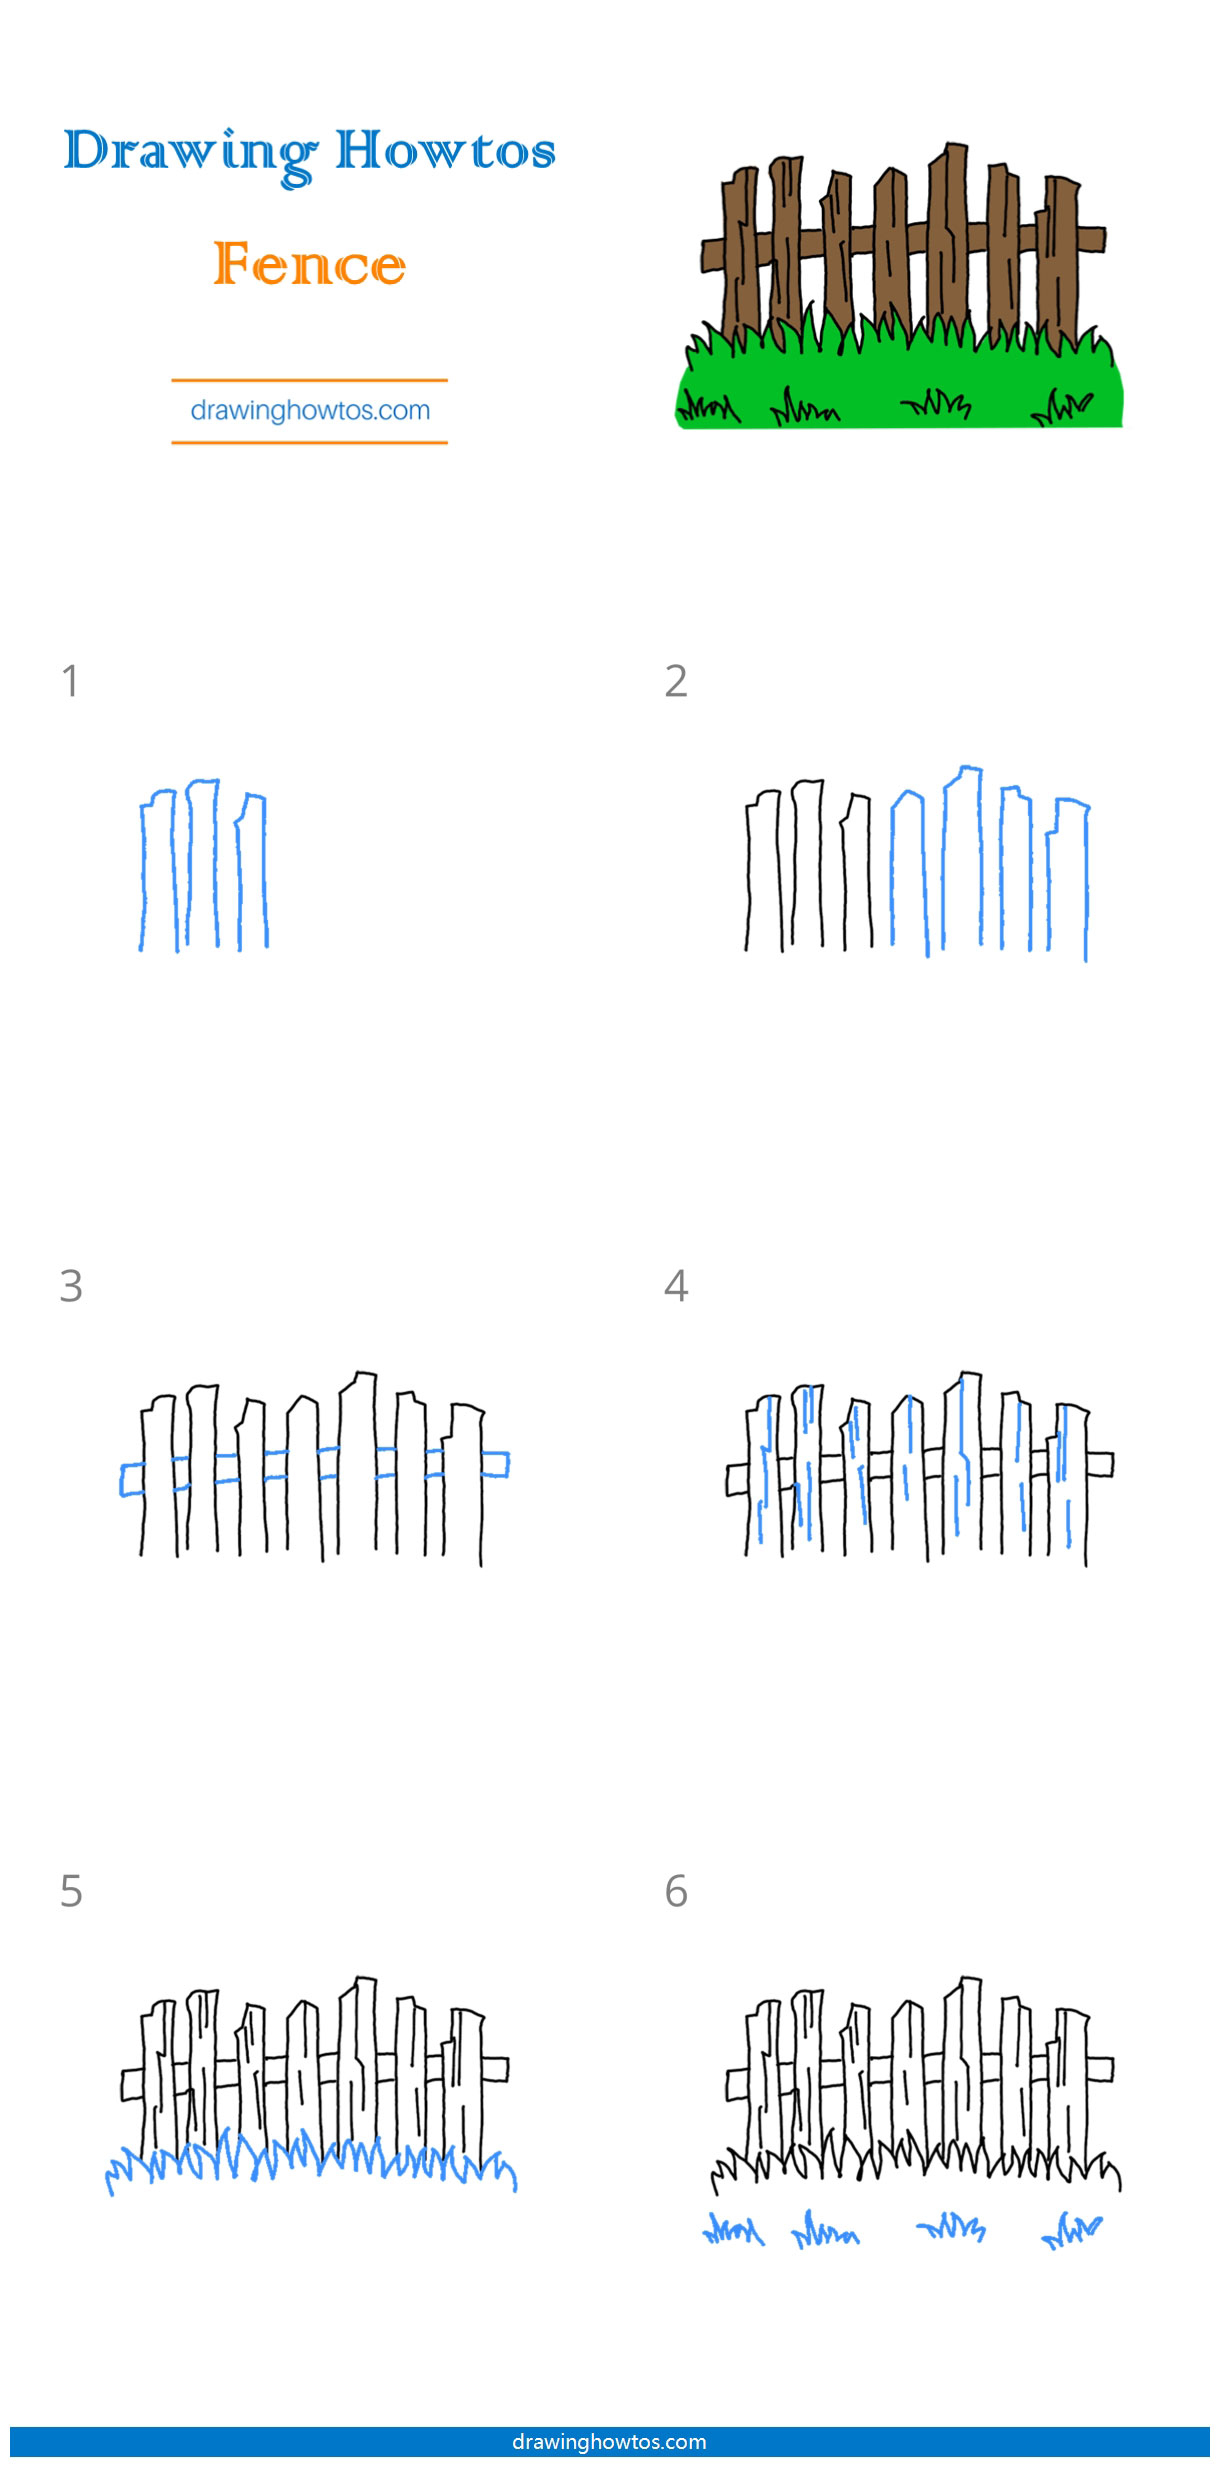 How to Draw a Fence Step by Step